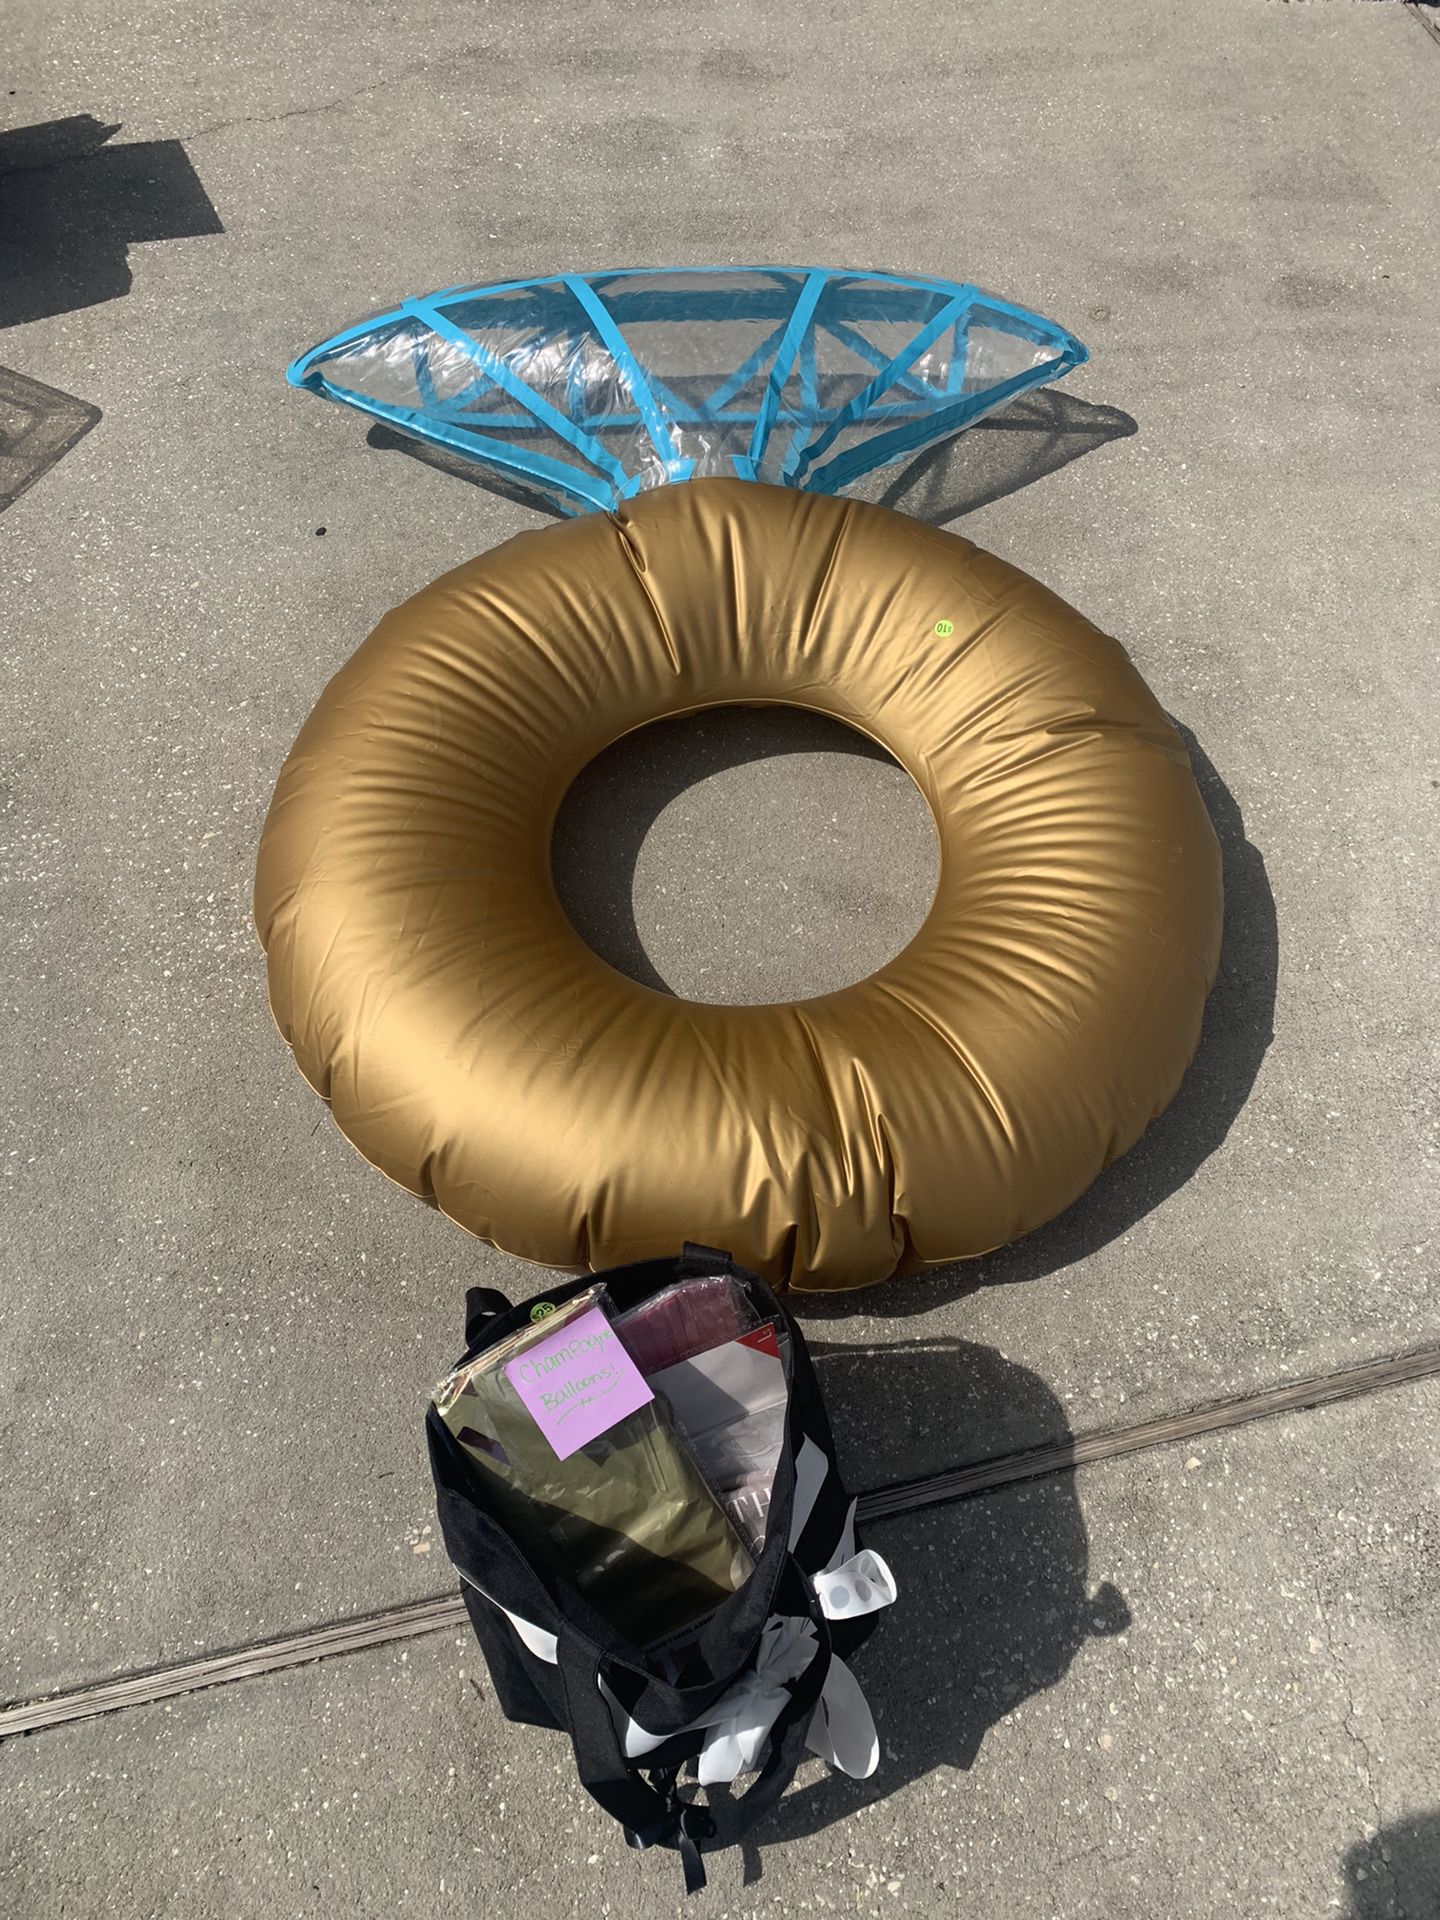 Engagement Ring Float And Bag Full Of Bachelorette / Bride Items